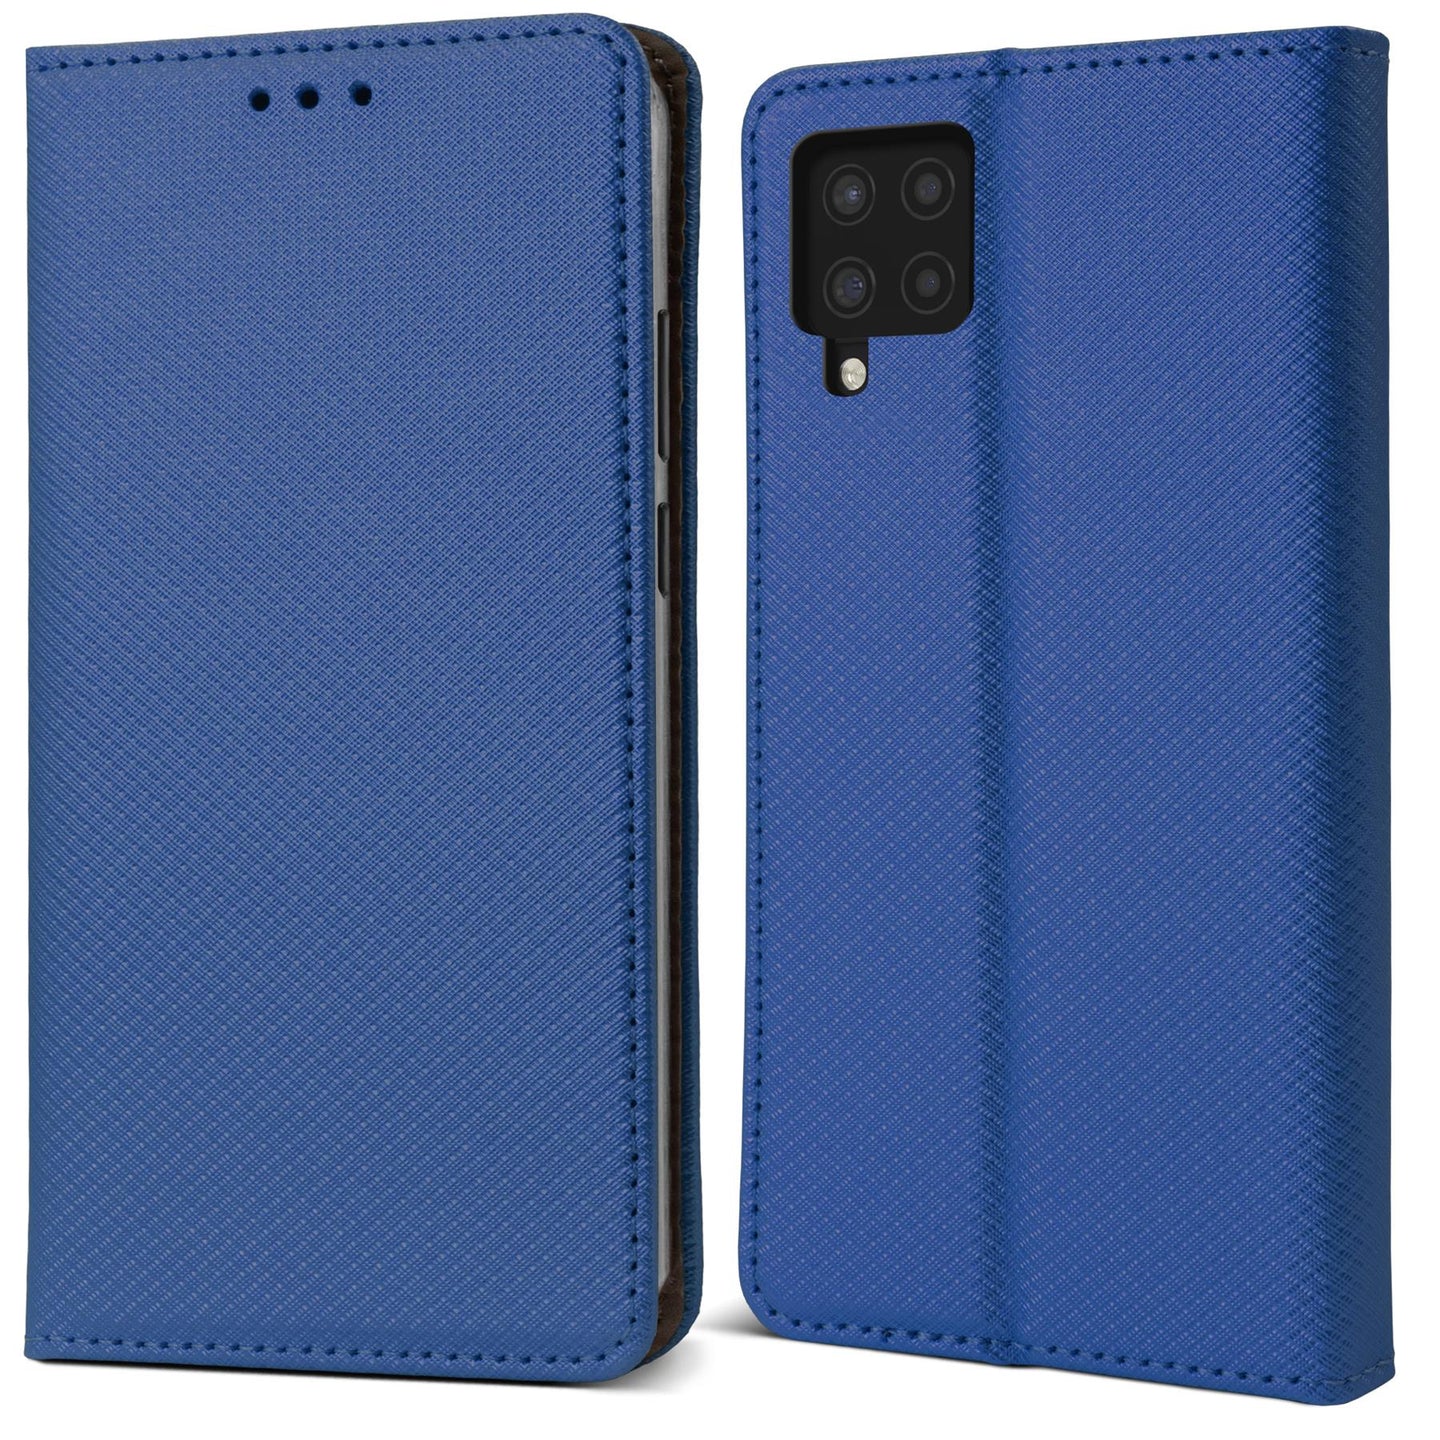 Moozy Case Flip Cover for Samsung A22 4G, Dark Blue - Smart Magnetic Flip Case Flip Folio Wallet Case with Card Holder and Stand, Credit Card Slots, Kickstand Function